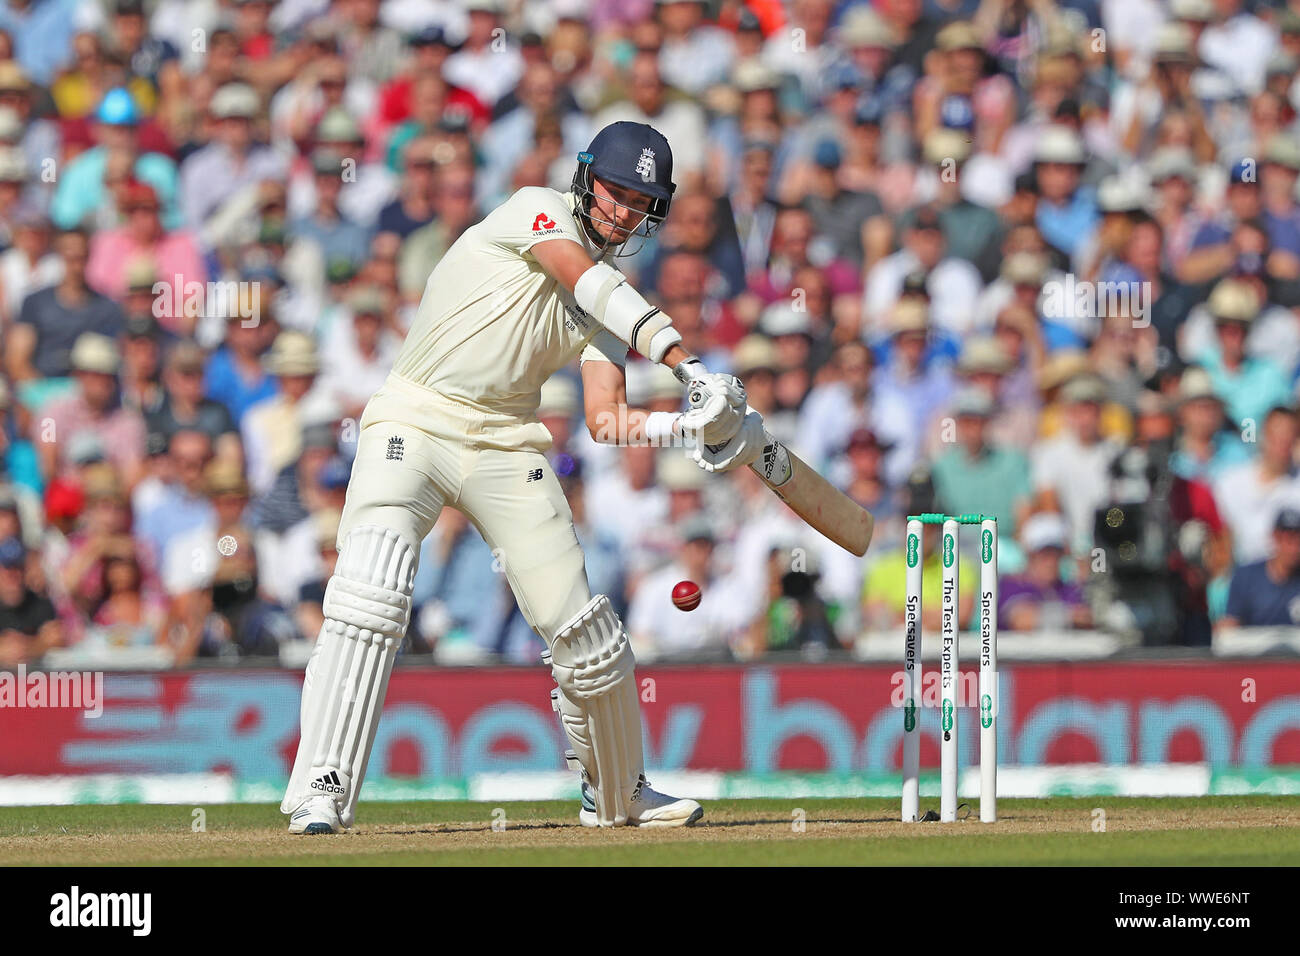 LONDON, ENGLAND. 15 SEPTEMBER 2019: Stuart Broad of England batting during day four of the 5th Specsavers Ashes Test Match, at The Kia Oval Cricket Ground, London, England. Stock Photo